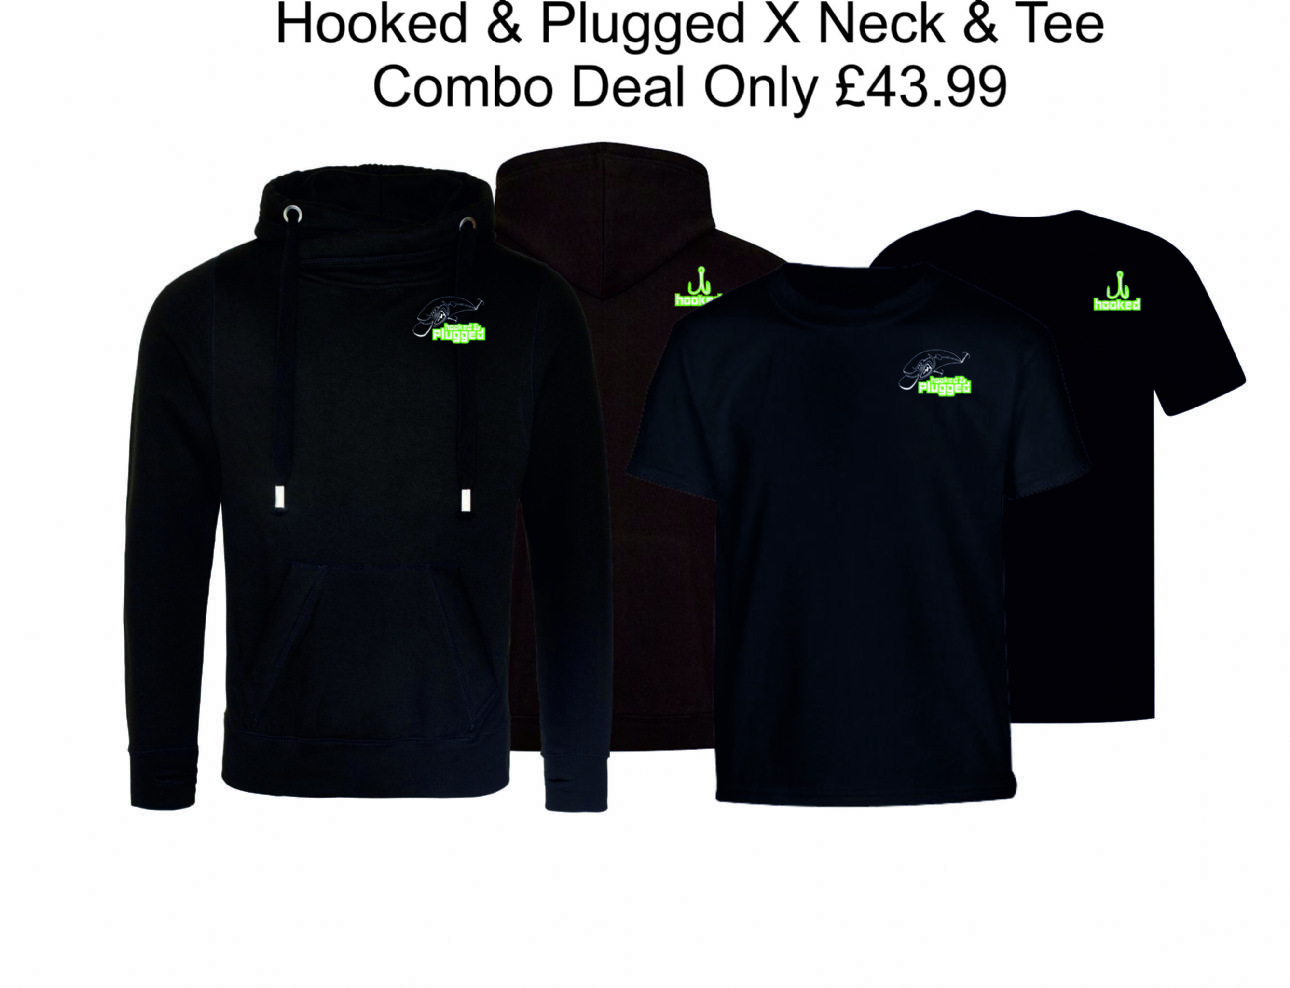 Hooked & Plugged Combo Deal.jpg 